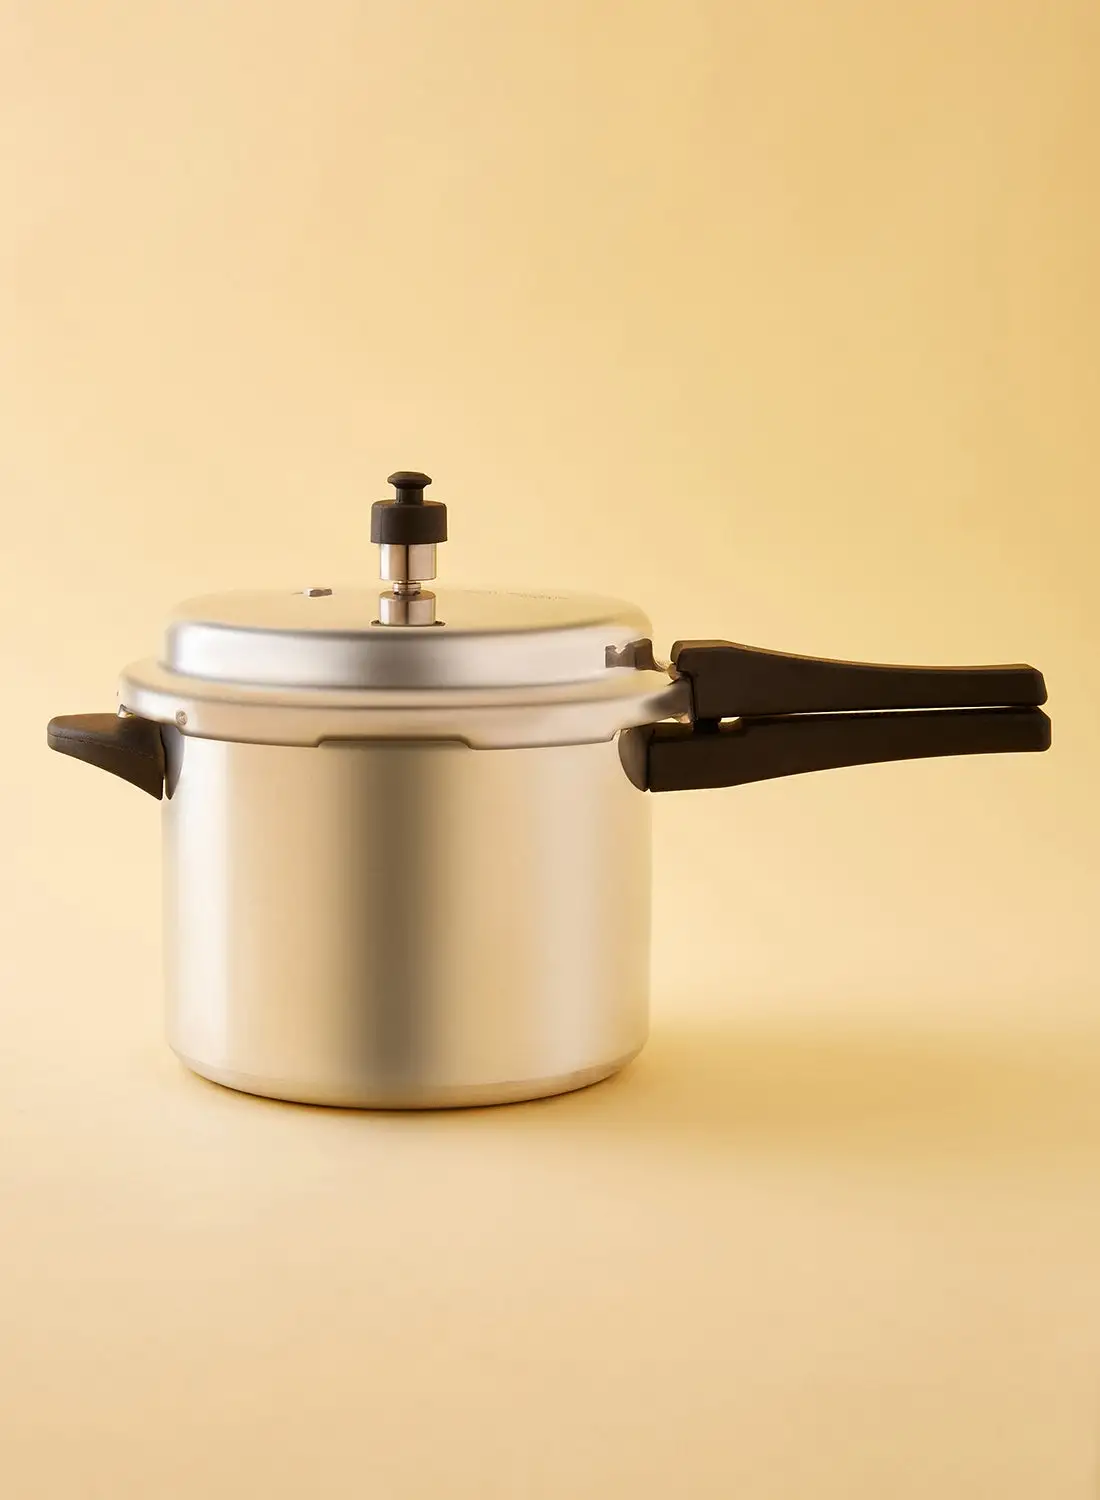 noon east 5 L Pressure Cooker - Aluminum - Induction Base - Heavy-Duty - With Lid, Durable Handles, Safe Lock - Silver